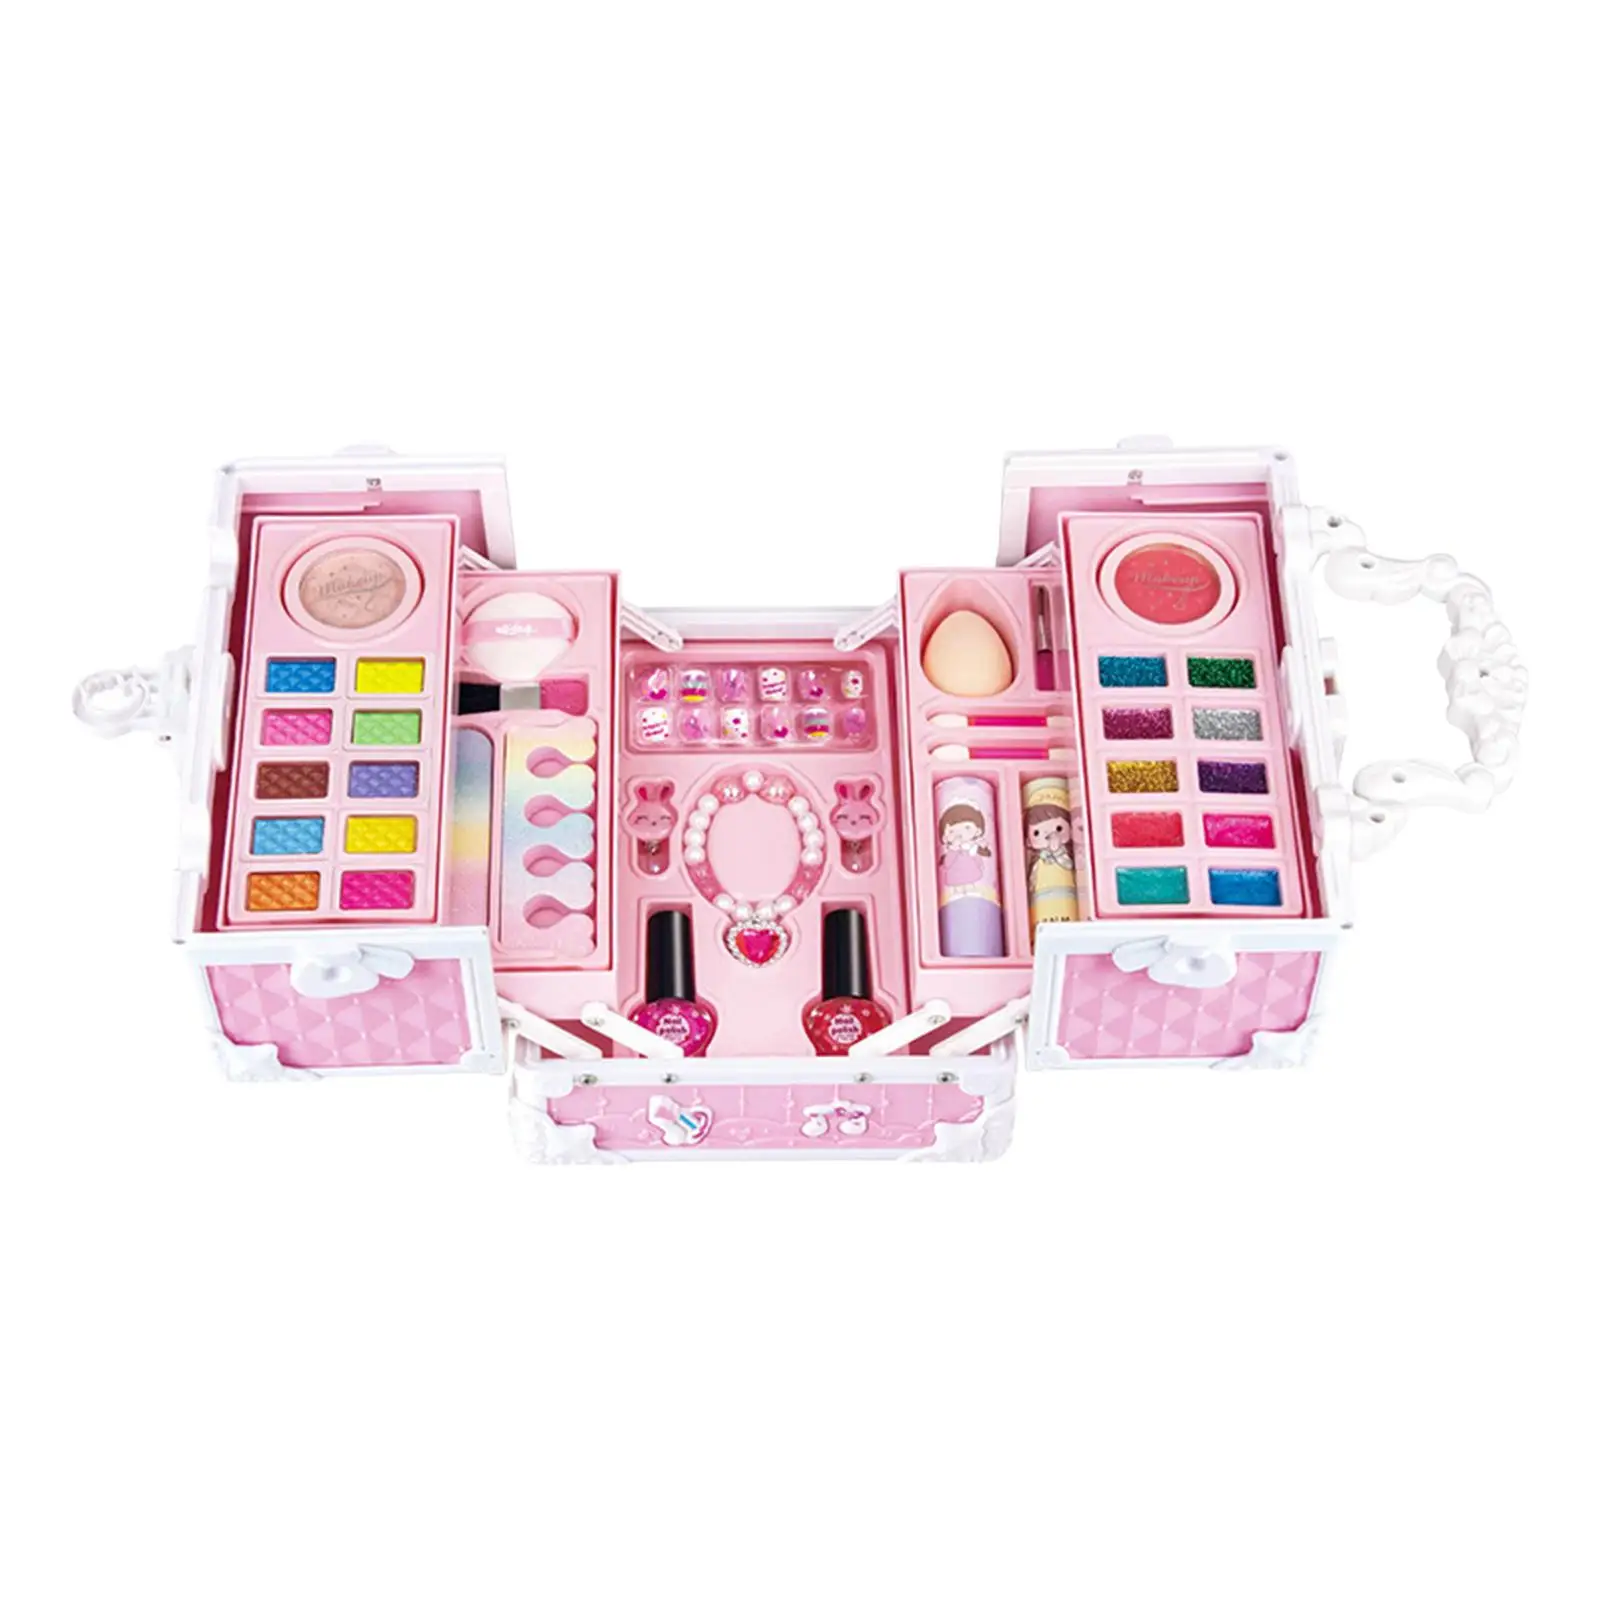 Pretend Play Makeup Beauty Set Role Play Games Kids Washable Makeup Girls Toys Kids Makeup Kits for Toddlers Princess Dress up